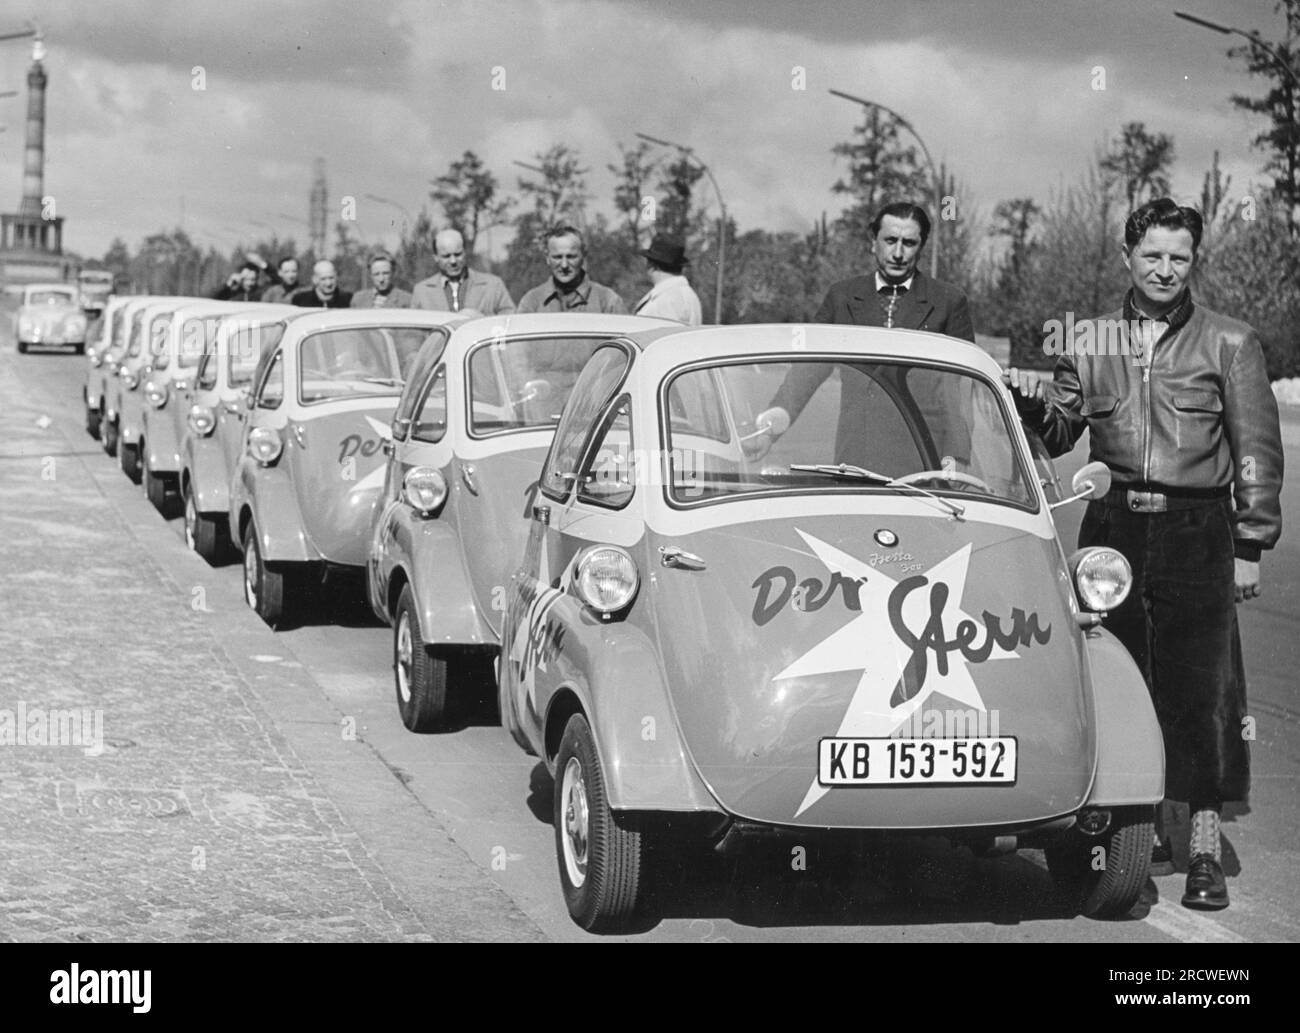 transport / transportation, cars, BMW 300 Isetta, vehicles of the magazine Stern, Berlin, 1955 / 1956, ADDITIONAL-RIGHTS-CLEARANCE-INFO-NOT-AVAILABLE Stock Photo